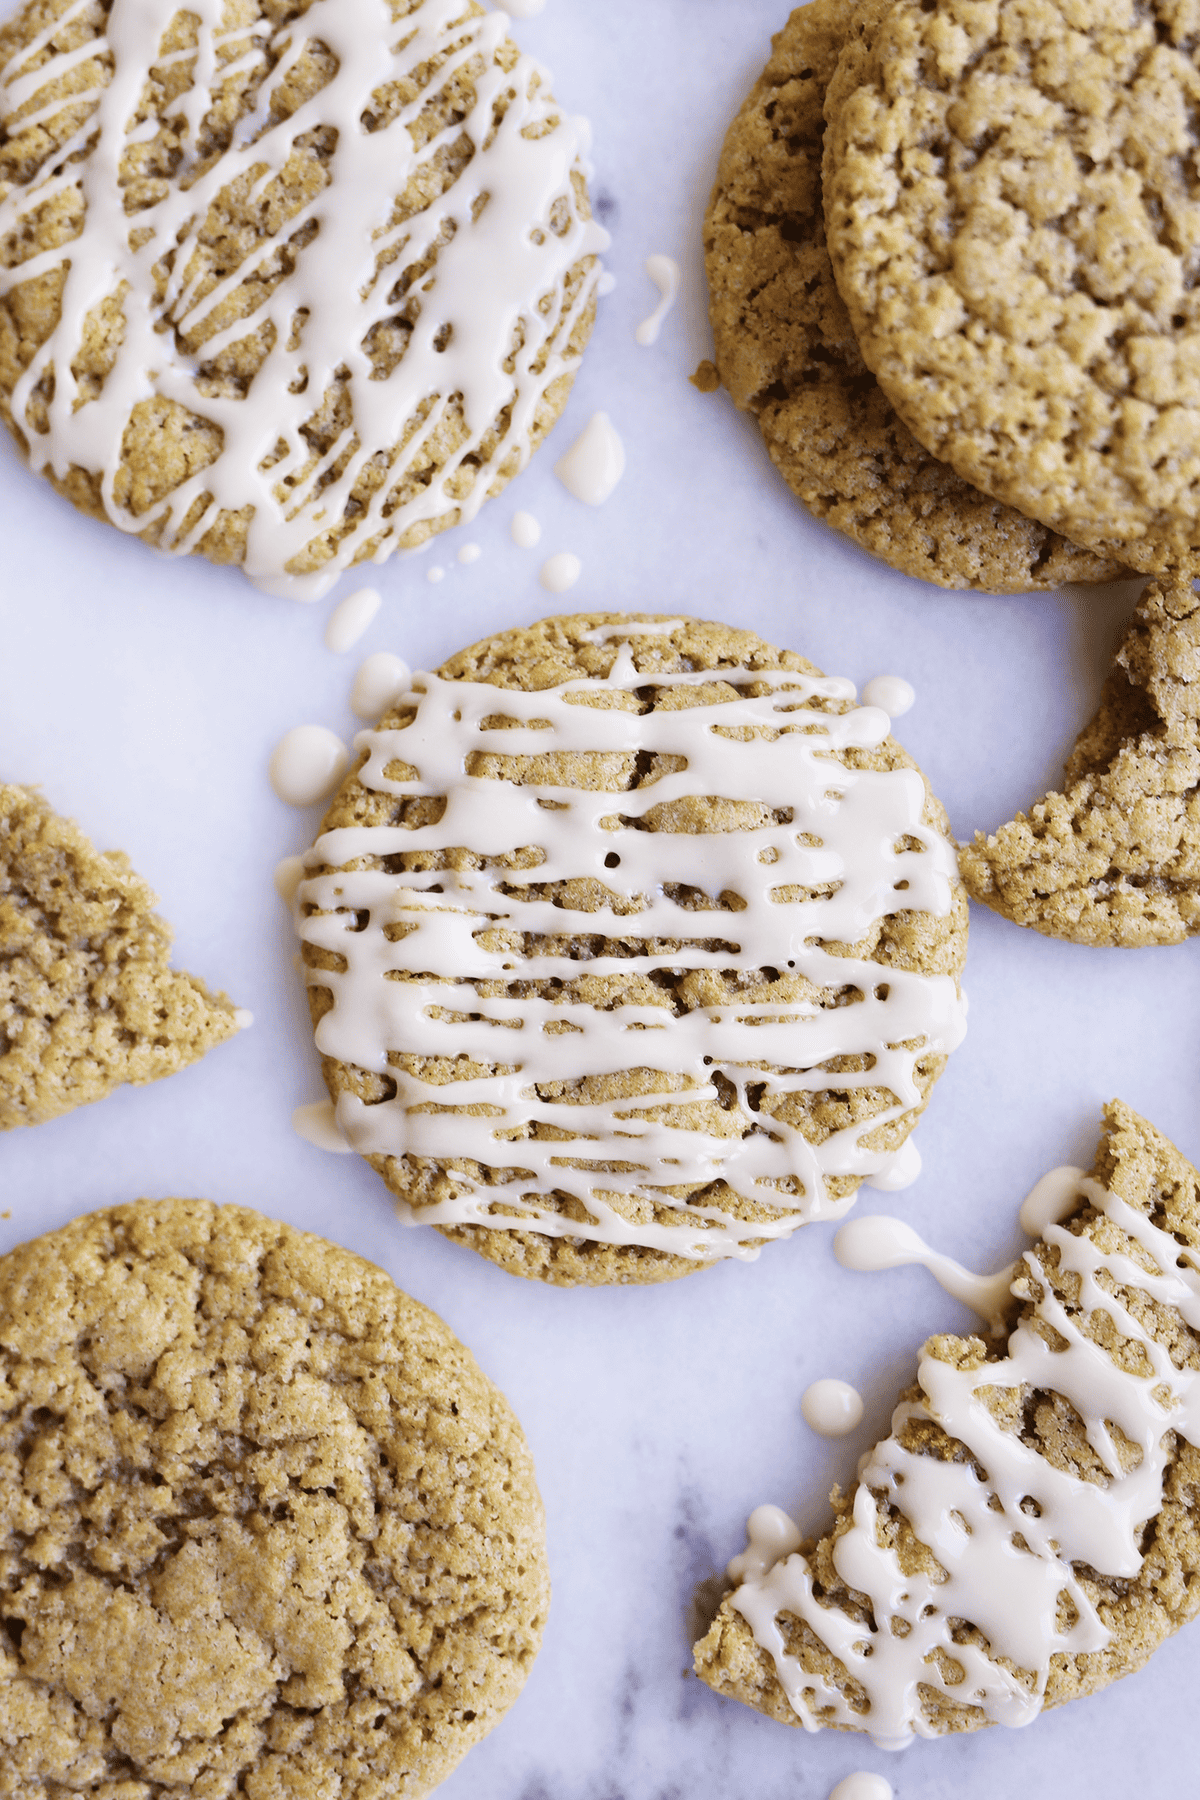 These Chewy Apple Cider Cookies are the best fall cookies ever! They are chewy in the middle and have crisps edges, they are vegan and absolutely delicious!